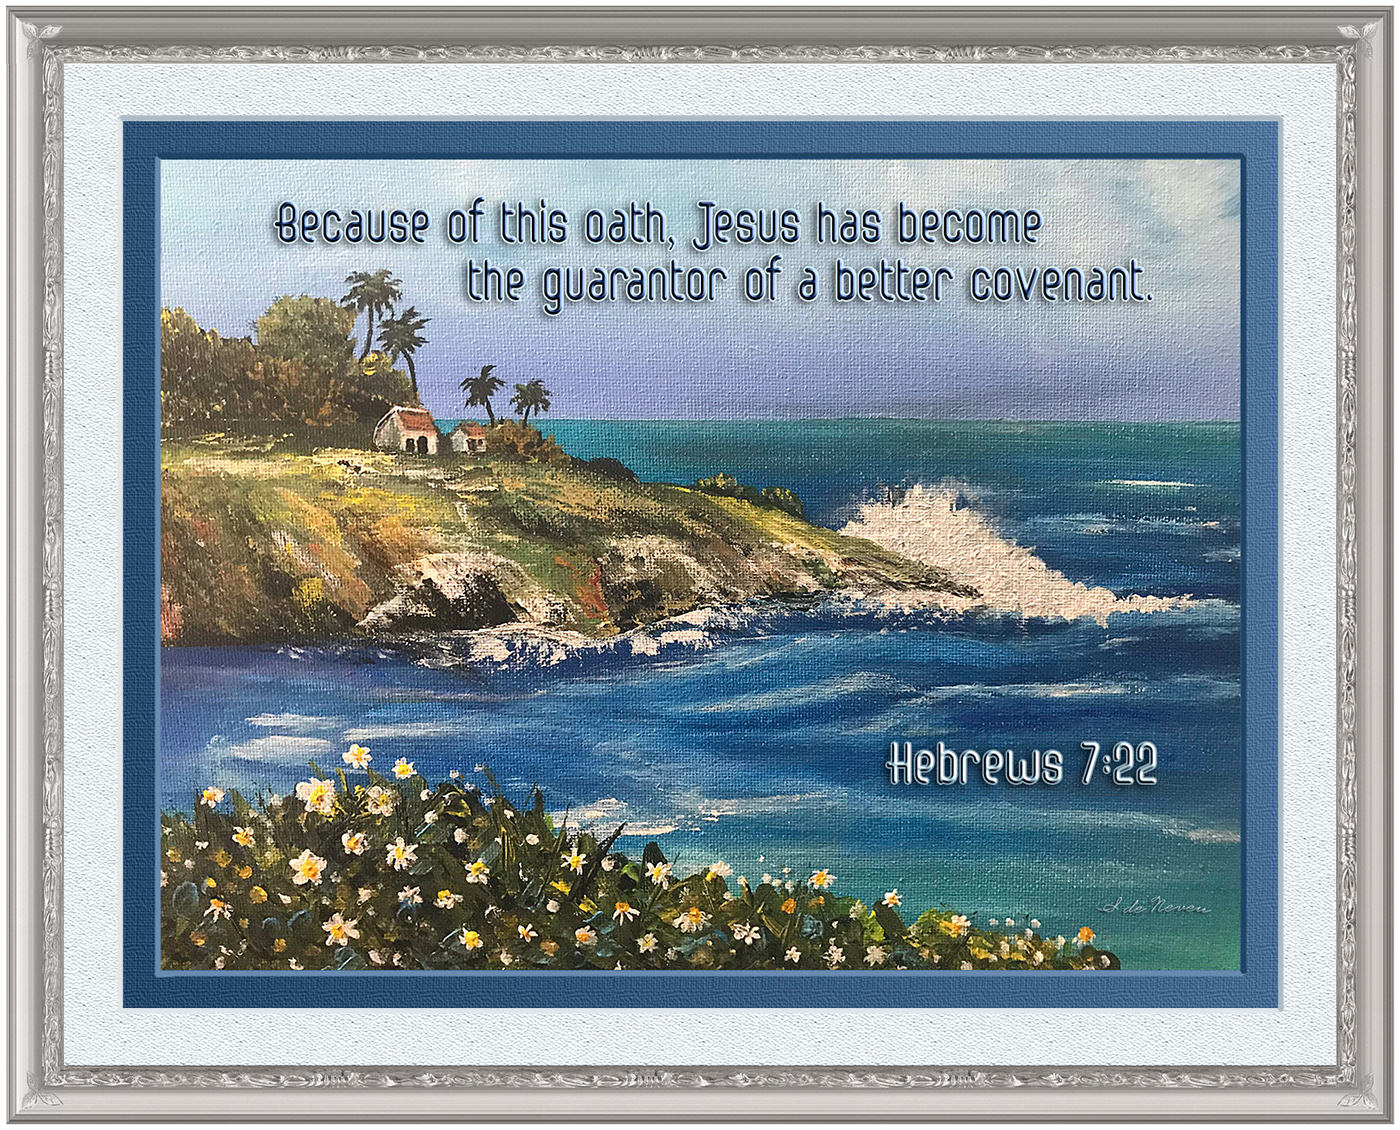 Scripture picture of Hebrews 7:22, emphasizing the fact that Jesus has become the guarantor of a better covenant